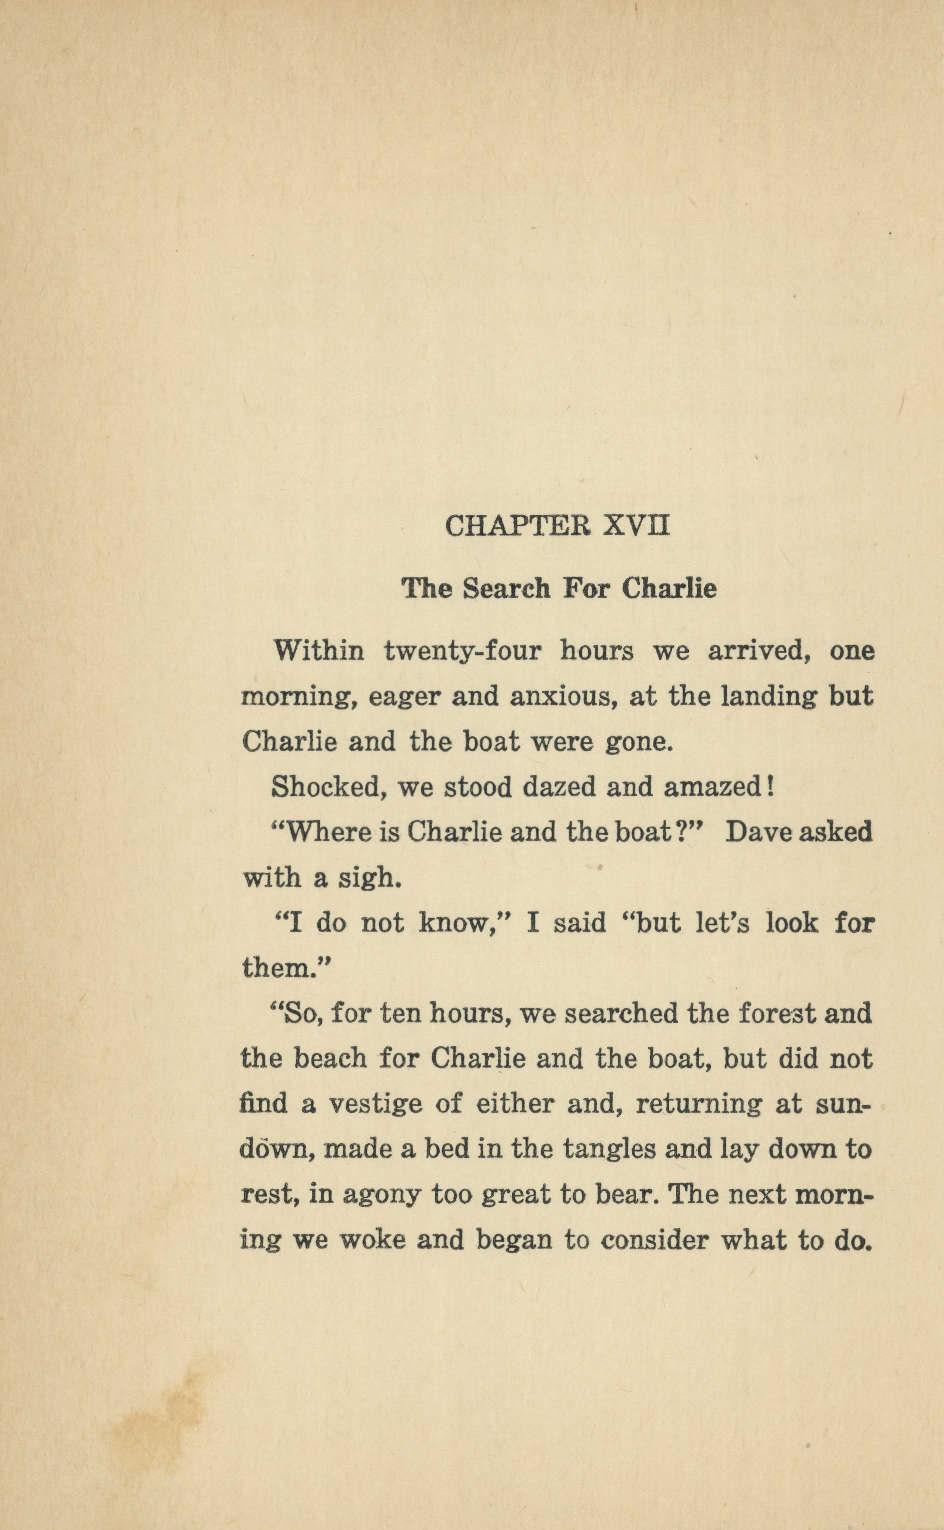 CHAPTER XVII The Search For Charlie Within twenty-four hours we arrived, one morning, eager and anxious, at the landing but Charlie and the boat were gone. Shocked, we stood dazed and amazed!